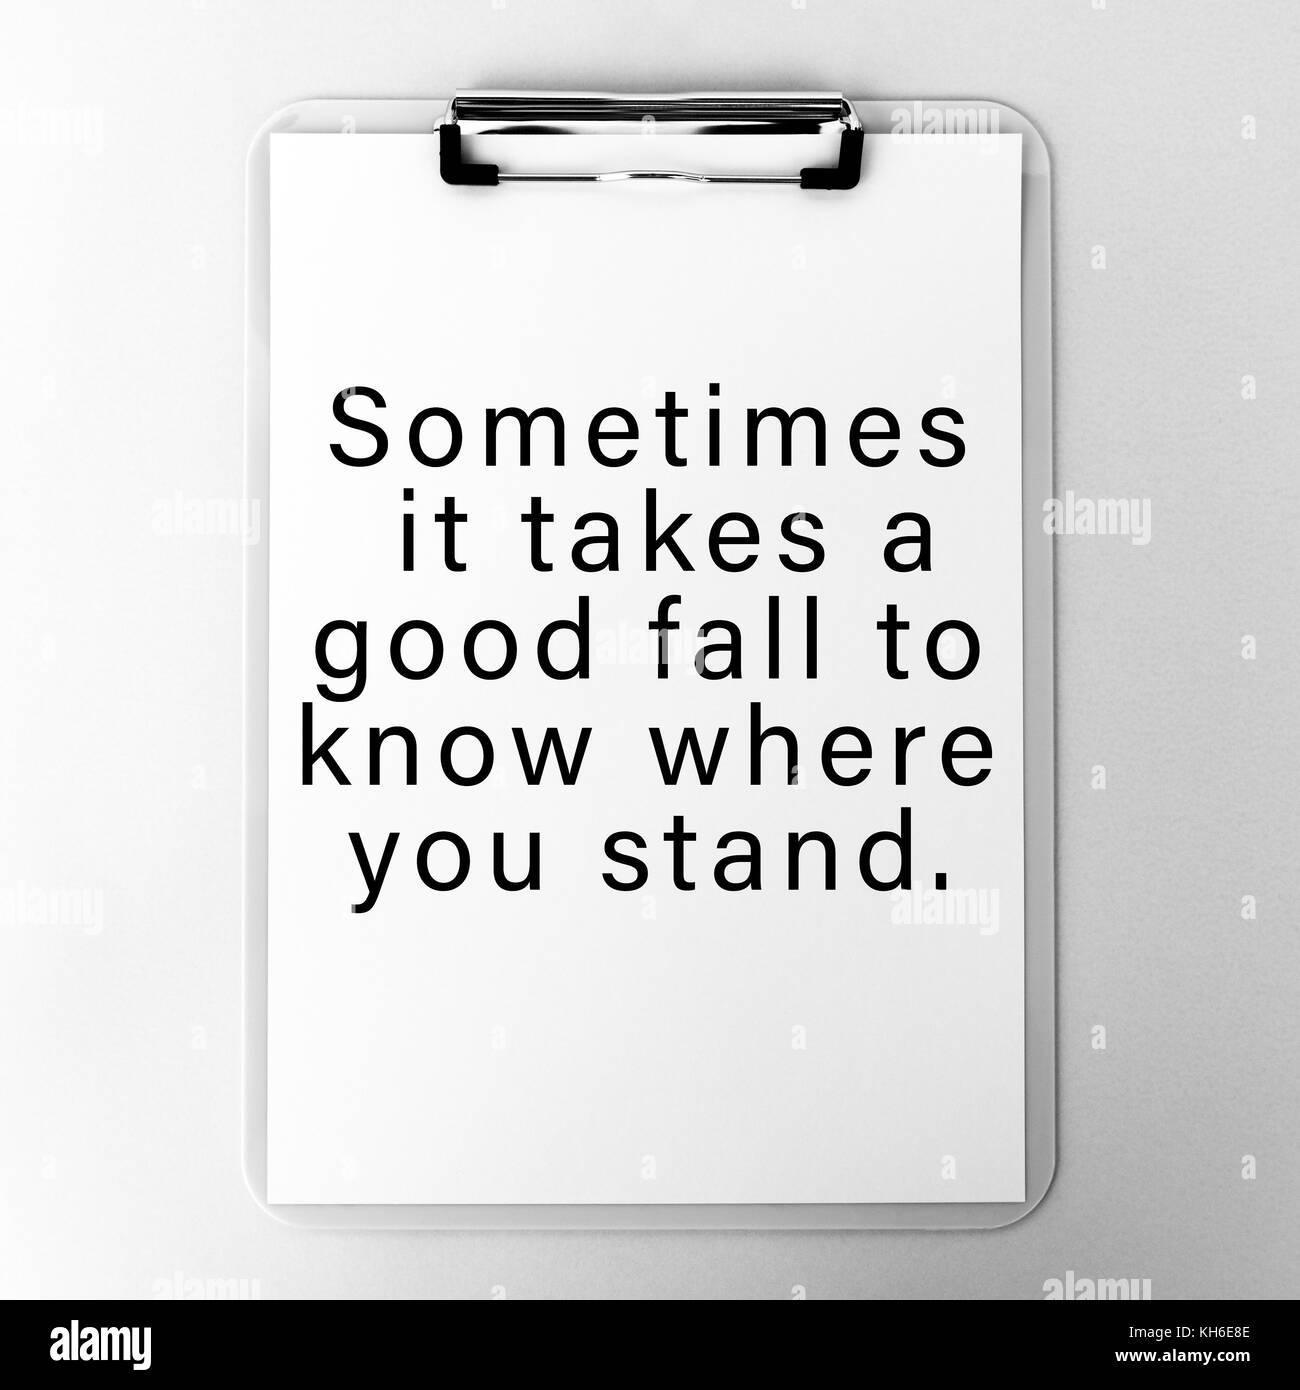 Life Inspirational And Motivational Quotes - Sometimes It Takes A Good Fall To Know Where You Stand. Stock Photo